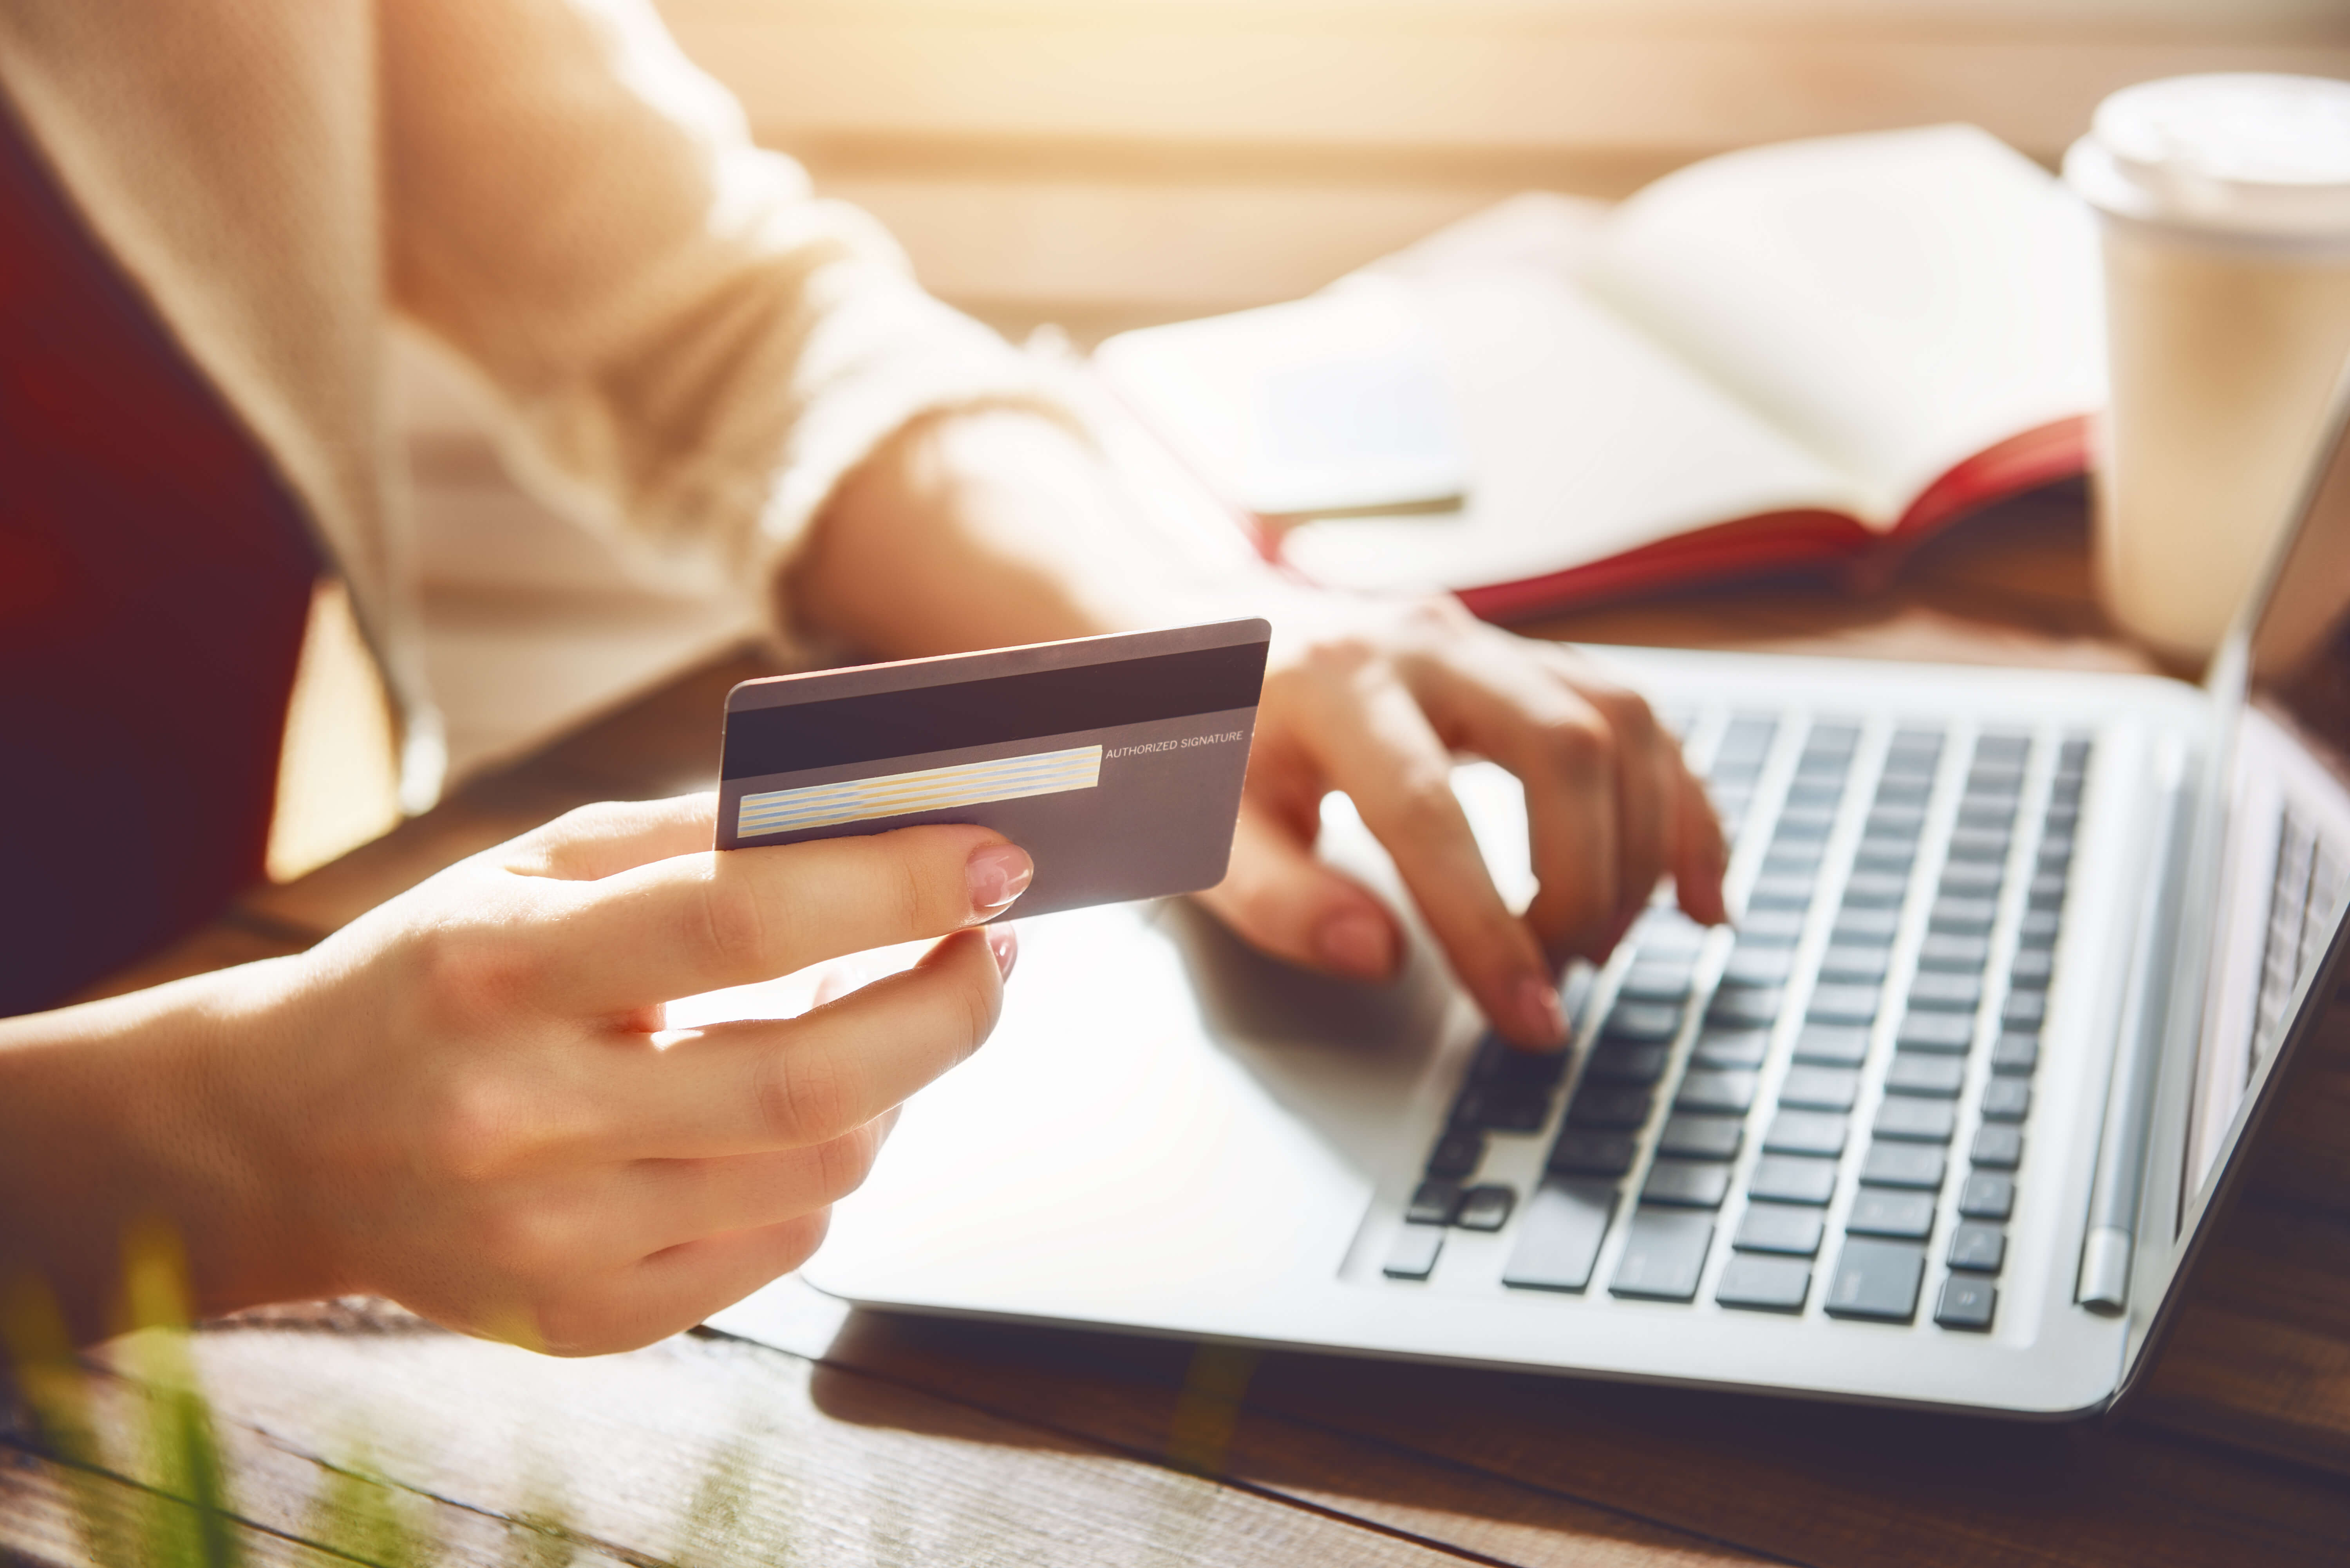 Woman is holding credit card and using laptop computer. Online shopping concept. Close up.